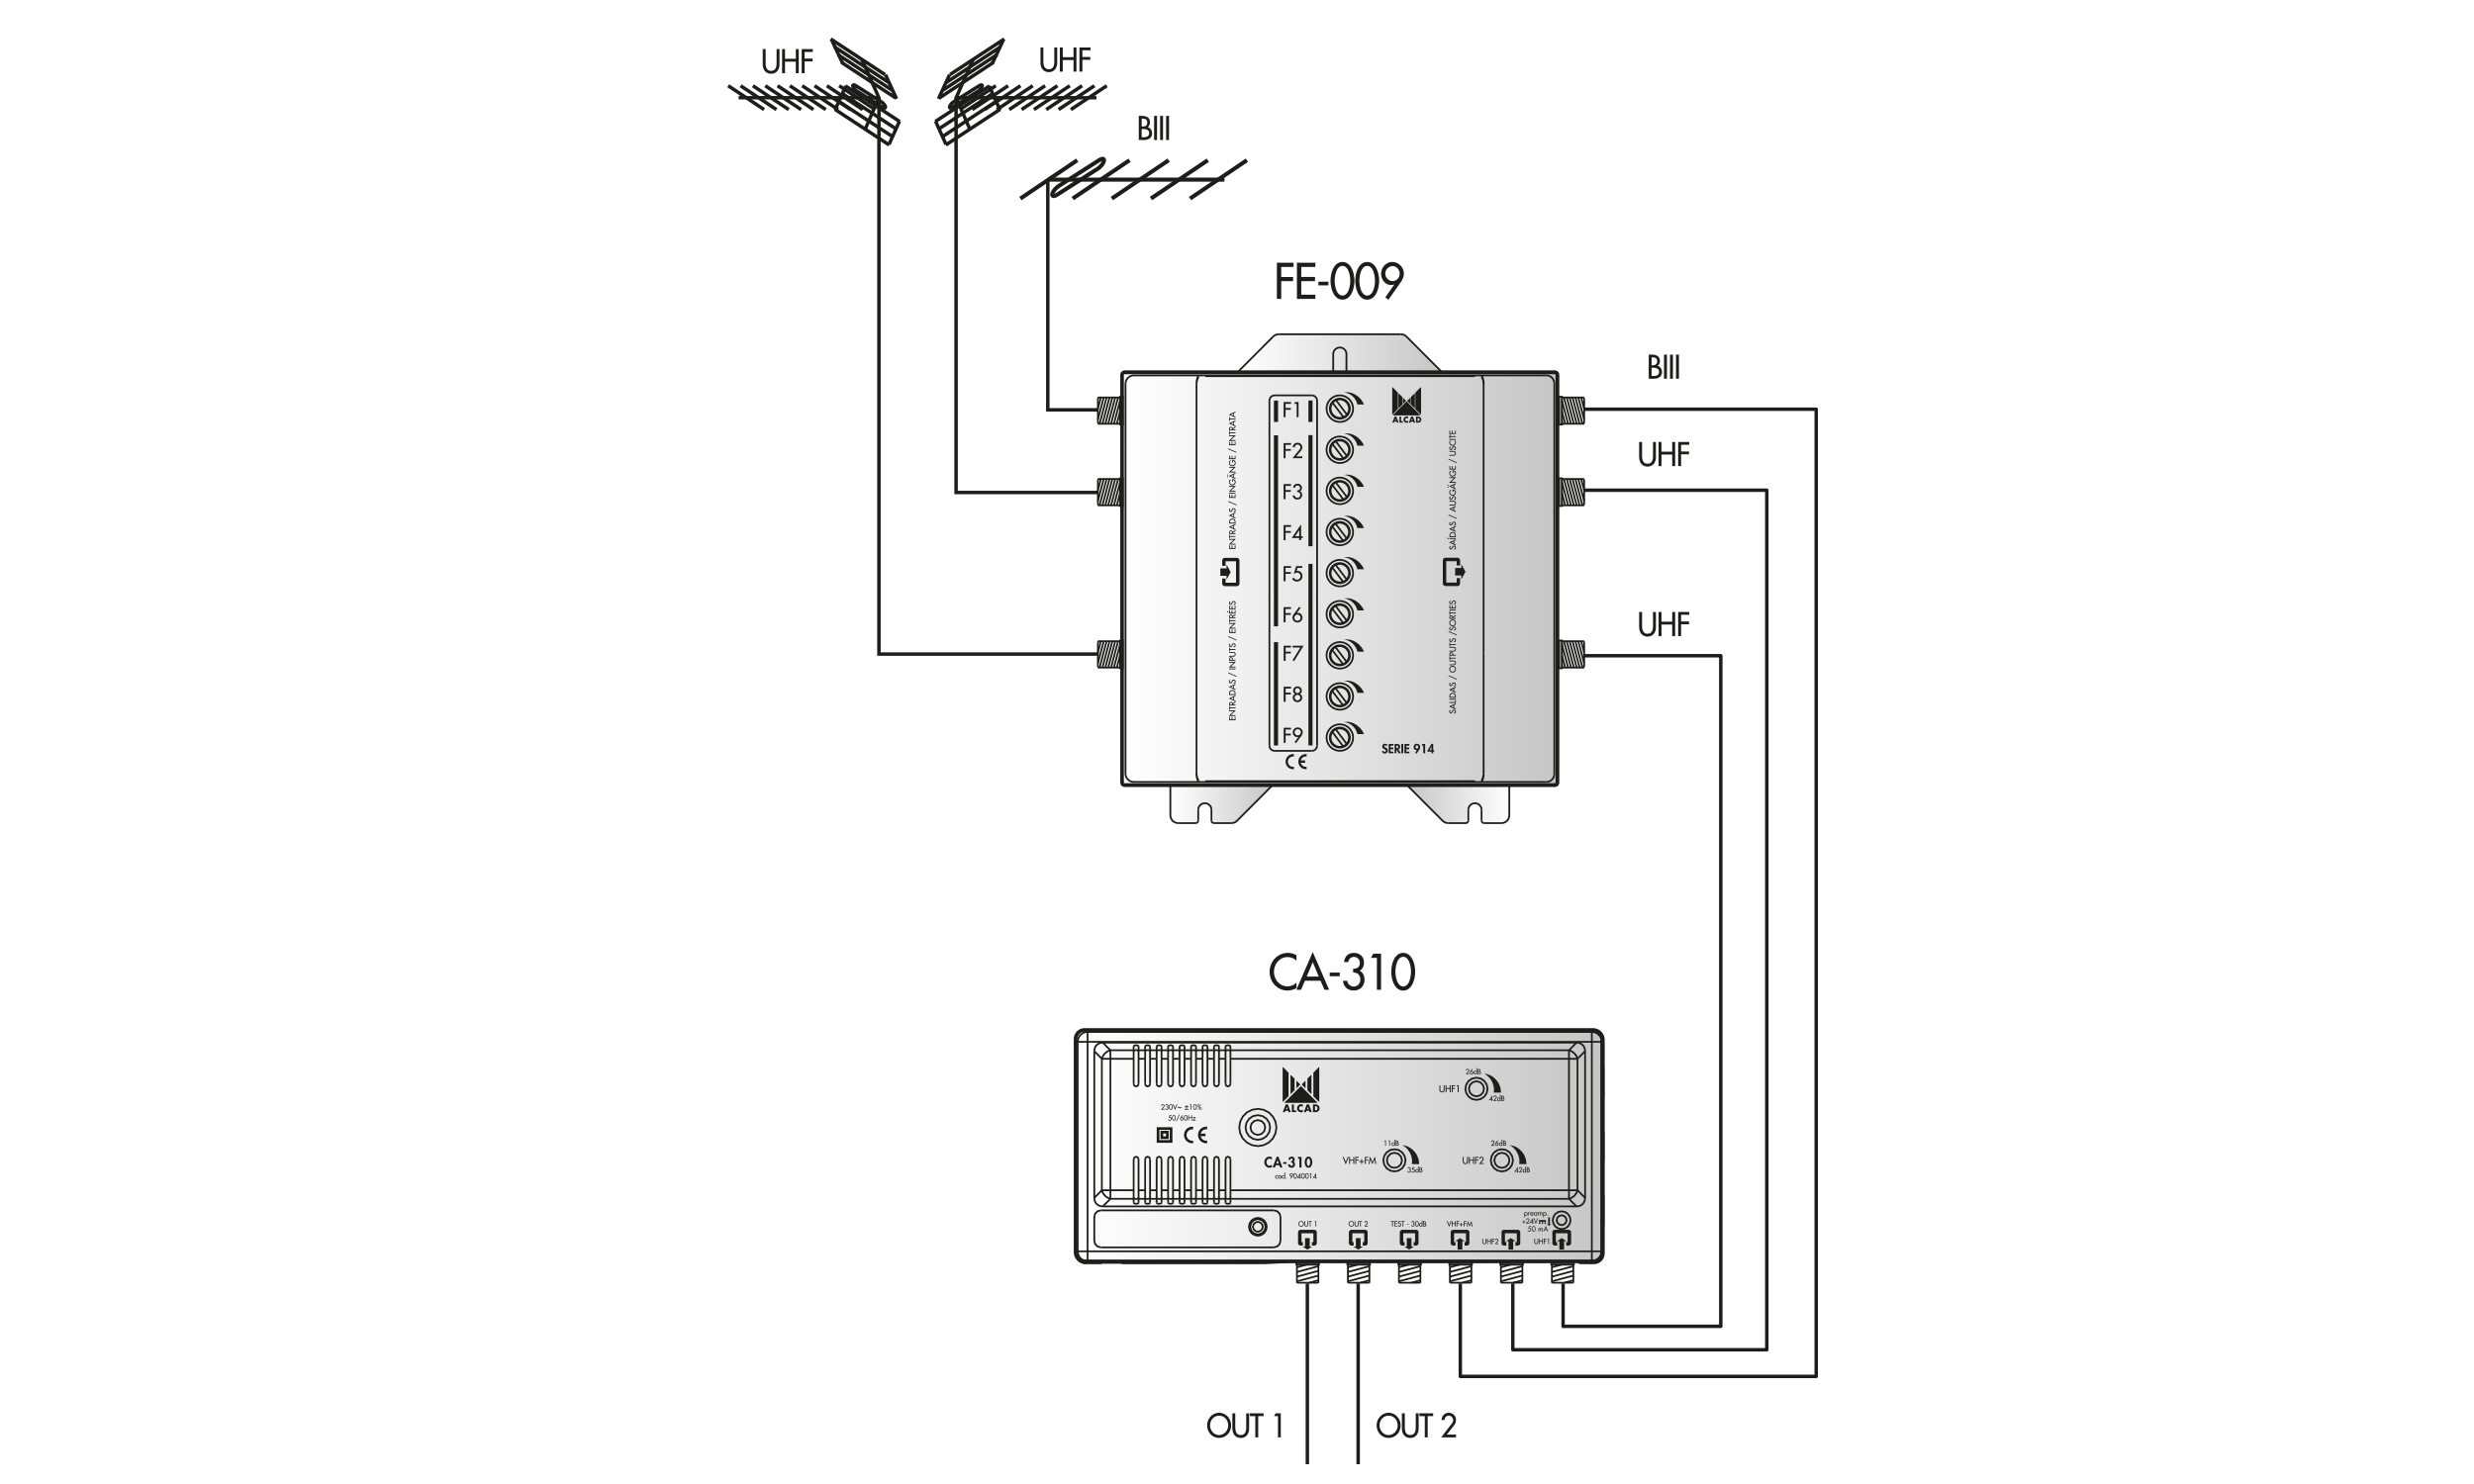 Mast amplifiers - Filtering and amplification - TV DISTRIBUTION